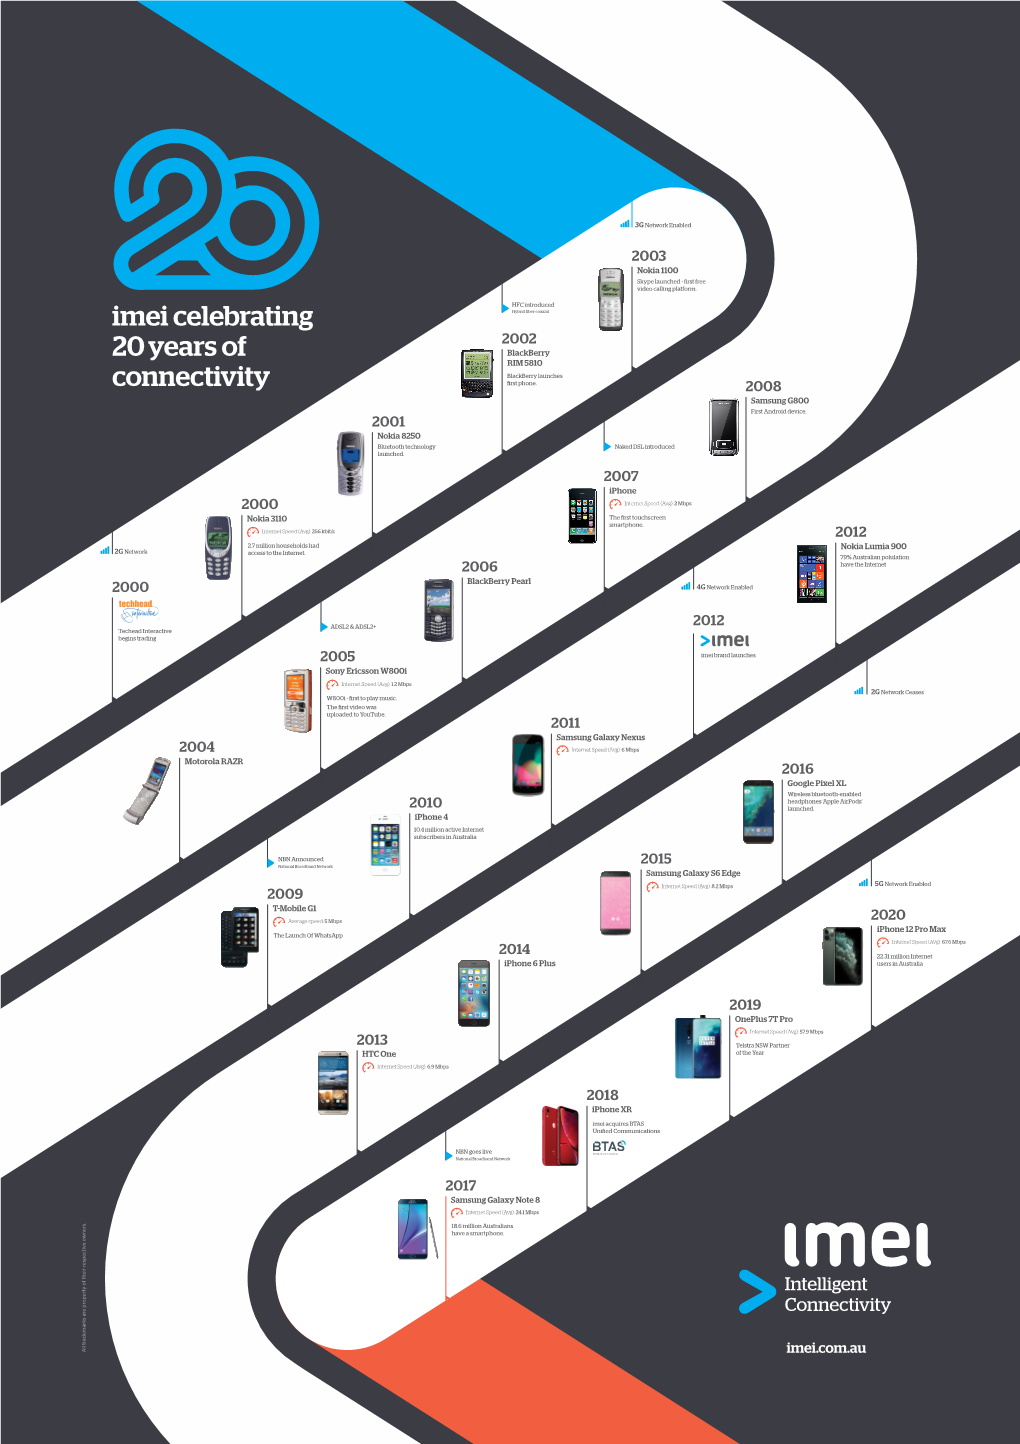 Imei Celebrating 20 Years of Connectivity